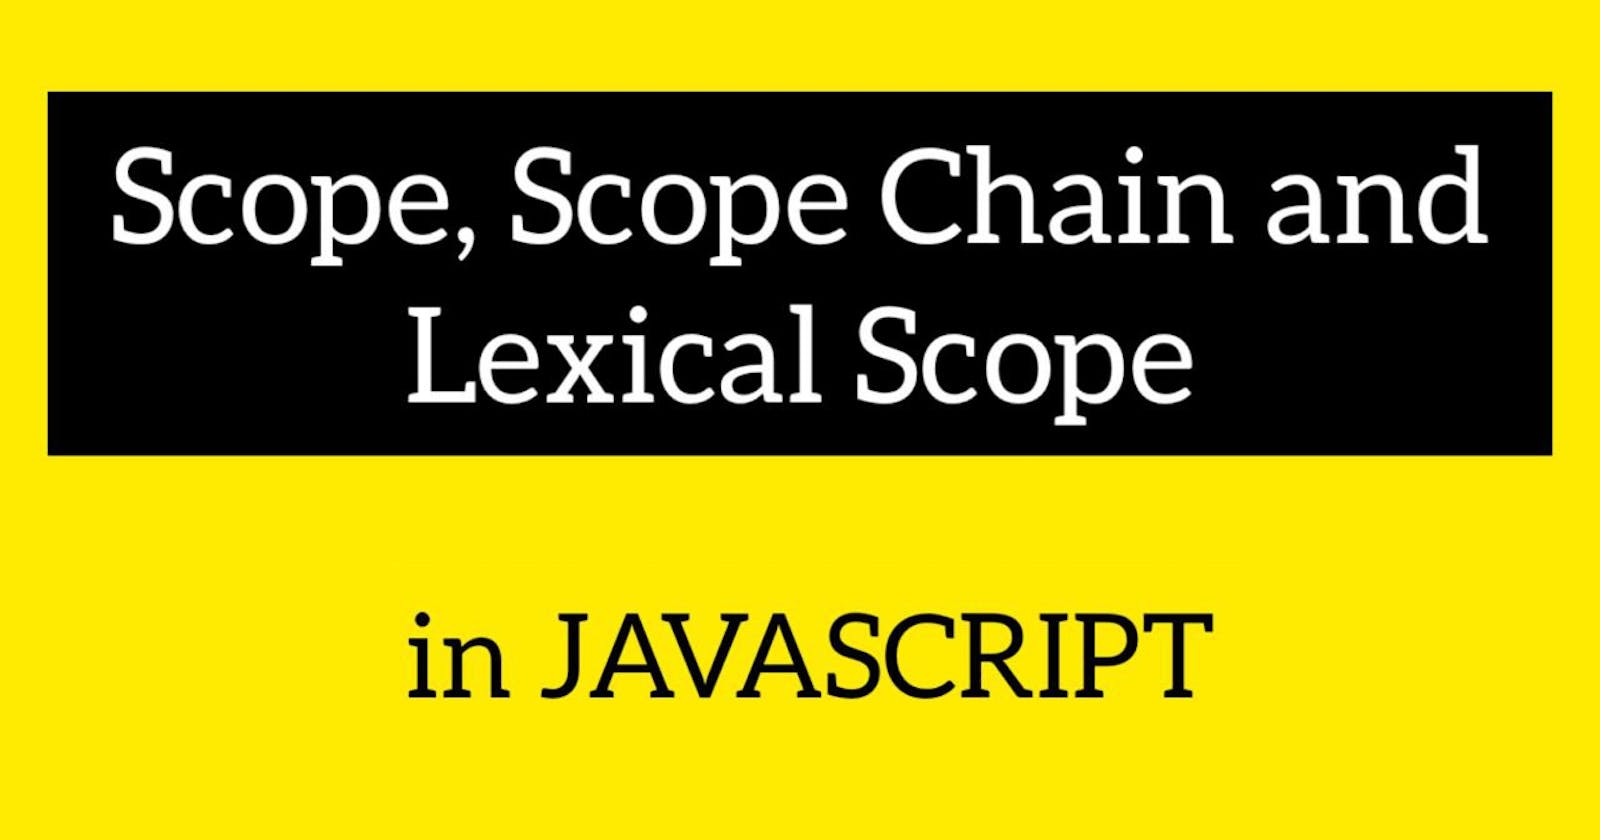 Scope, Scope Chain and Lexical Scope in JavaScript explained